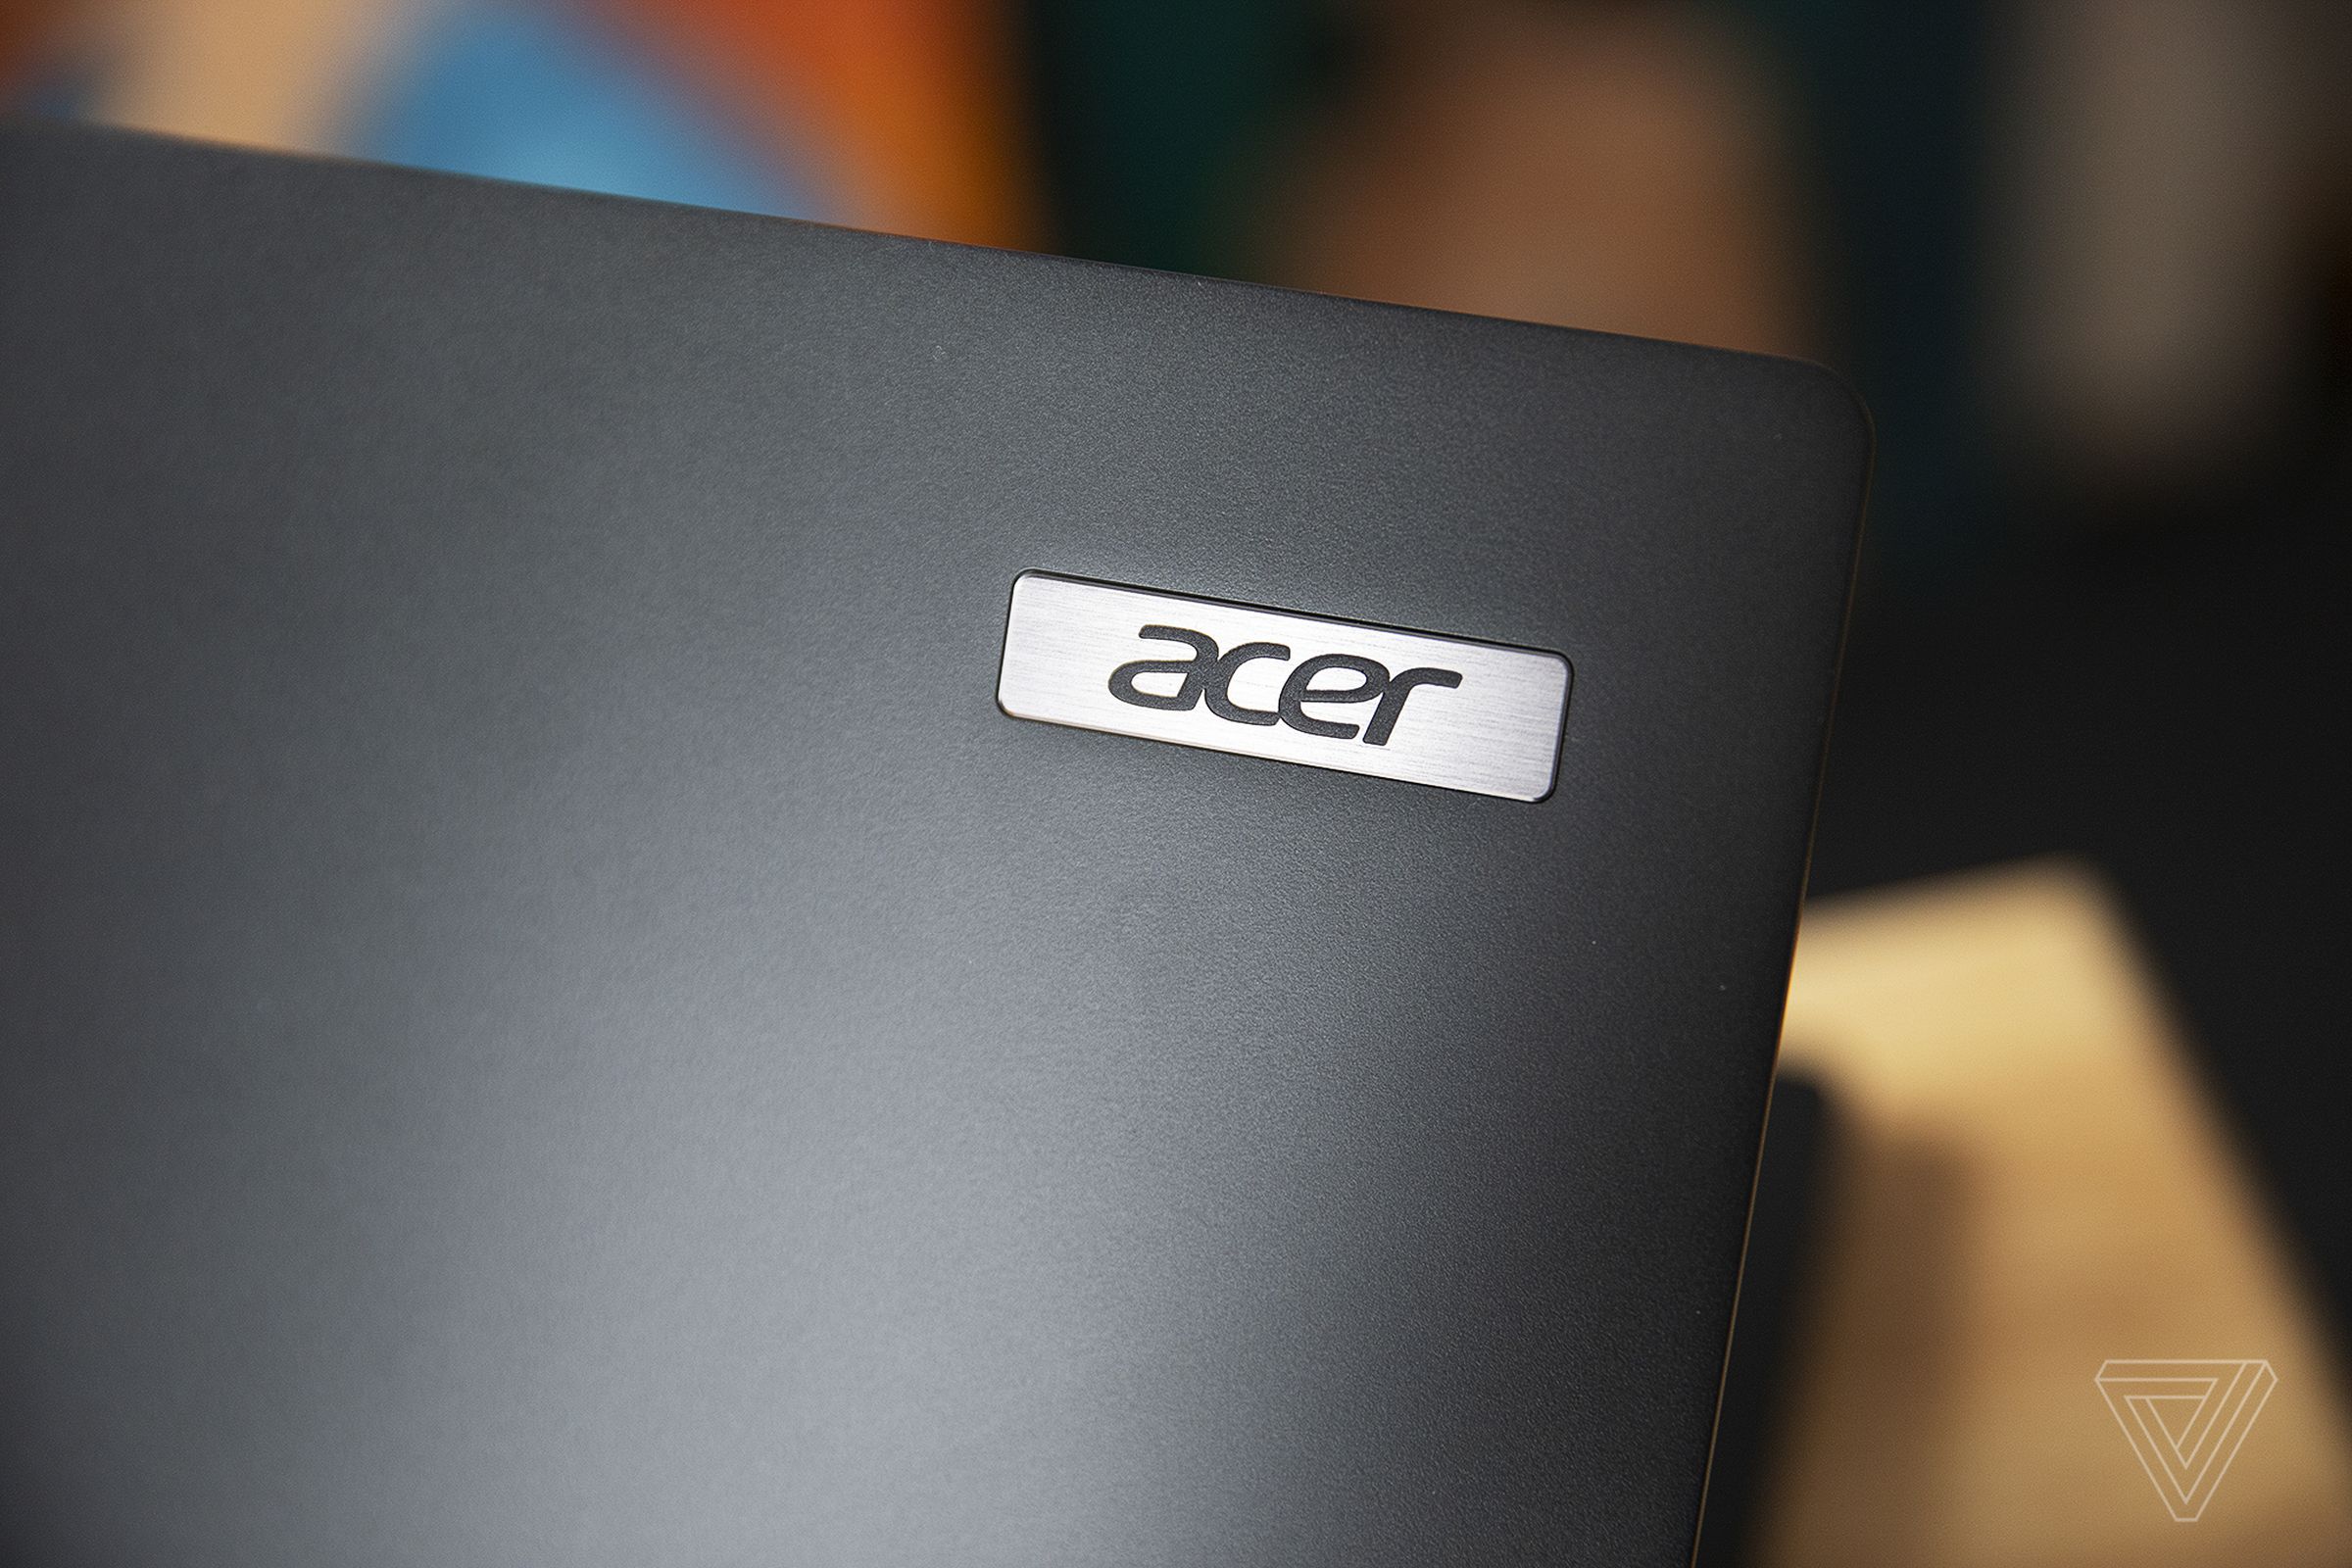 The Acer logo on the lid of the Acer Travelmate P6.